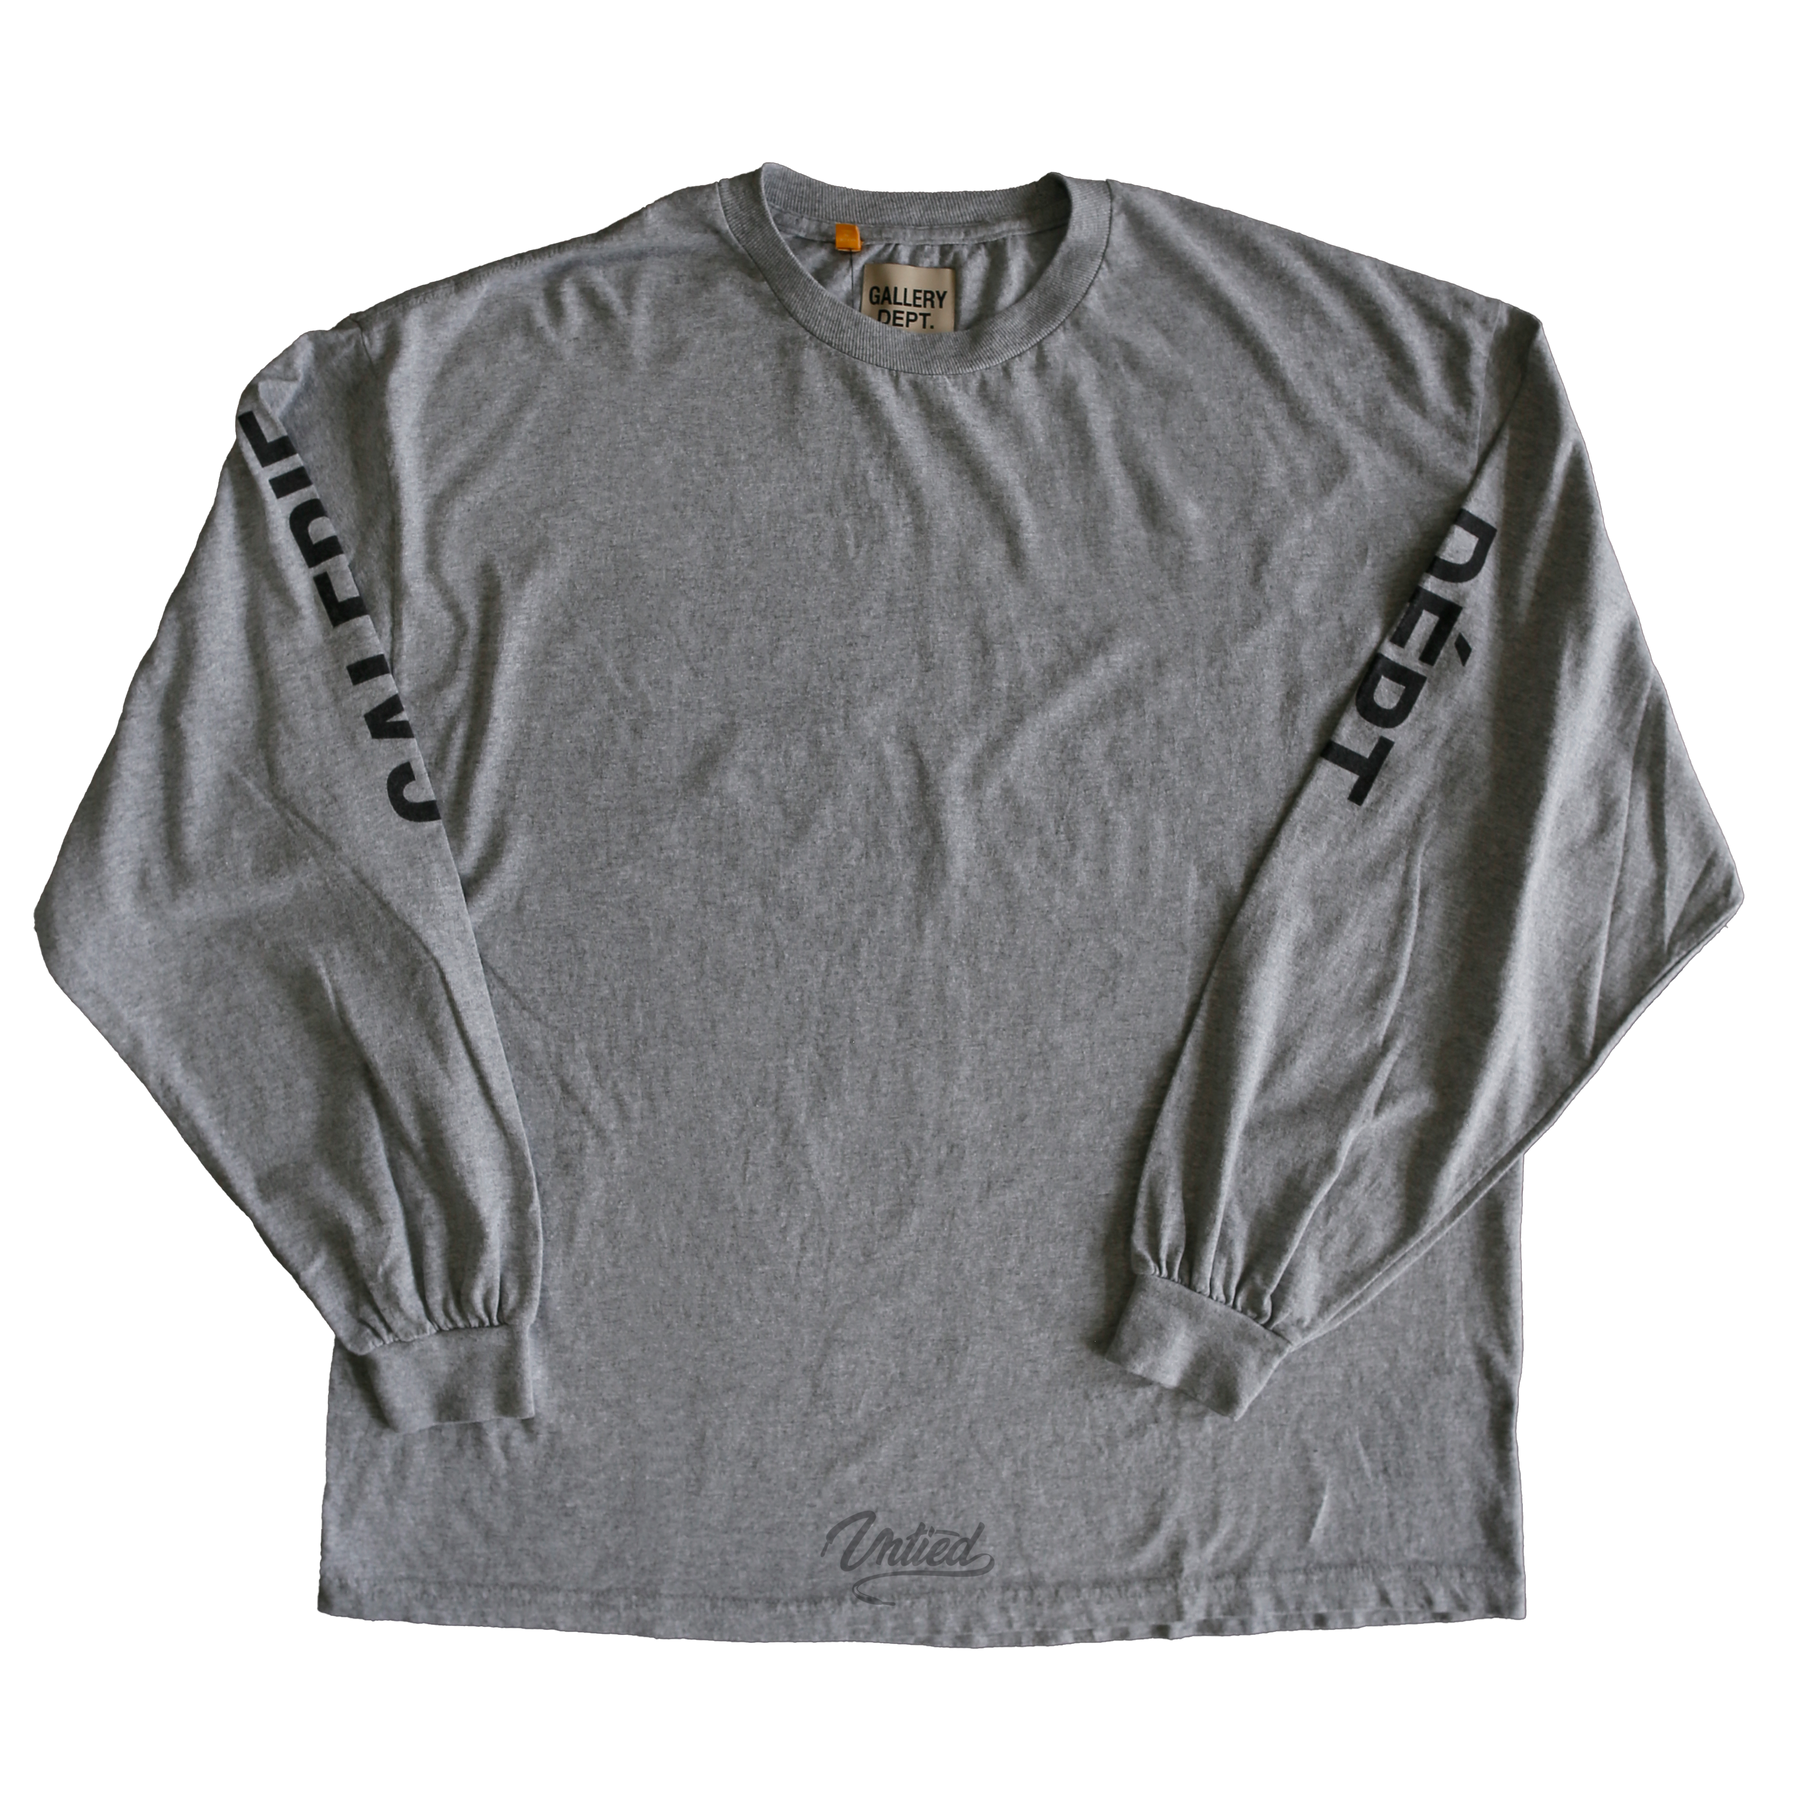 Gallery Dept. French Collector L/s Tee "Grey"